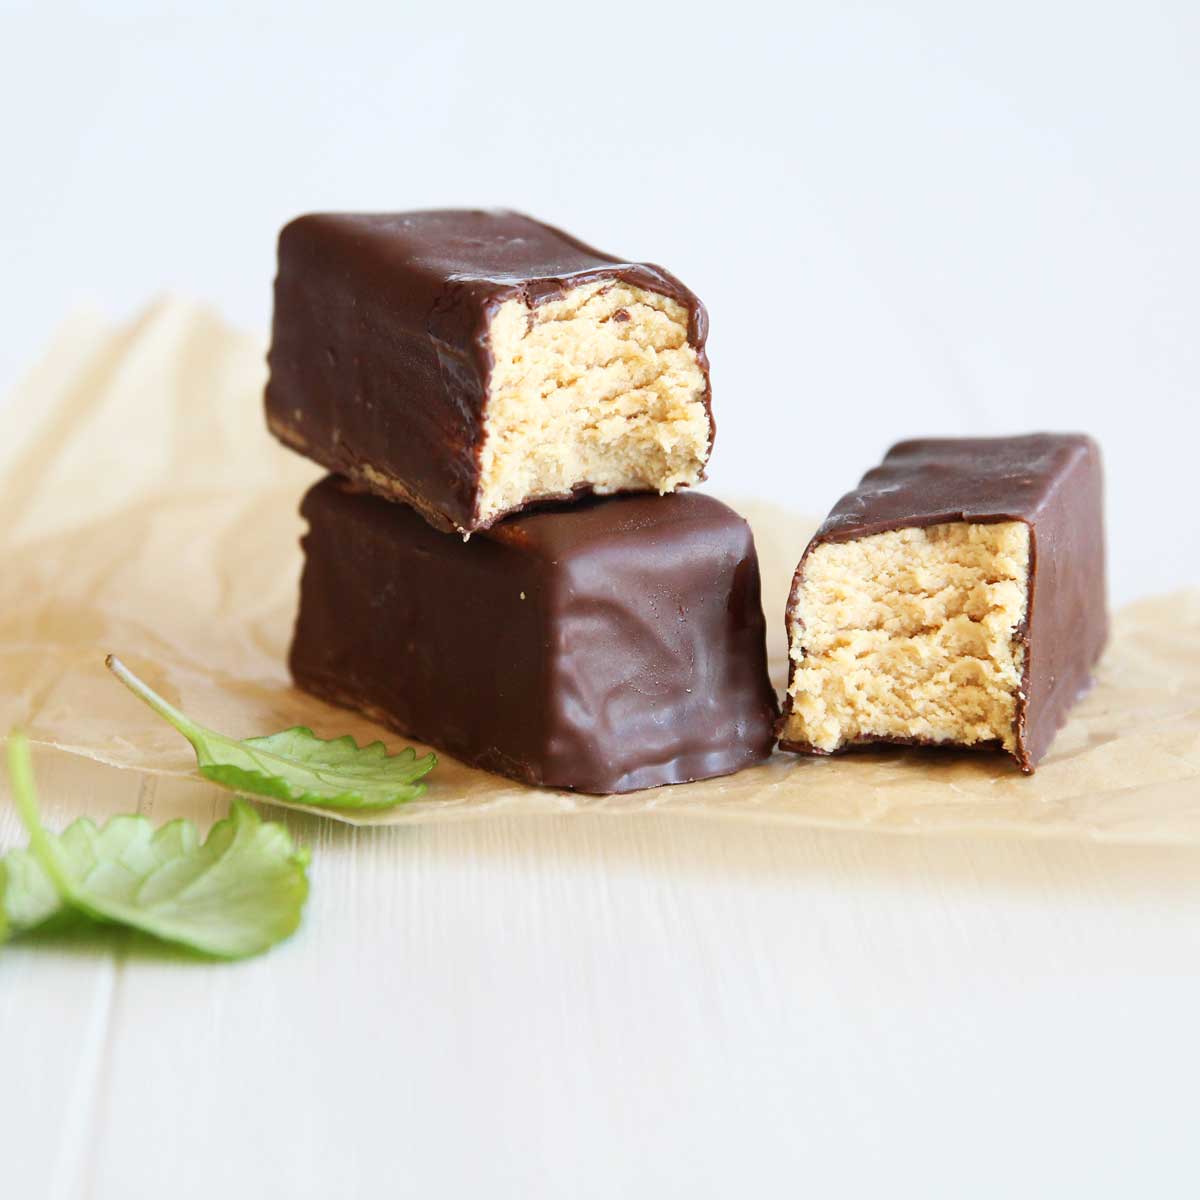 Simple Greek Yogurt Peanut Butter Protein Bars to eat for Breakfast or Post-Workout - PB Fit Protein Bars